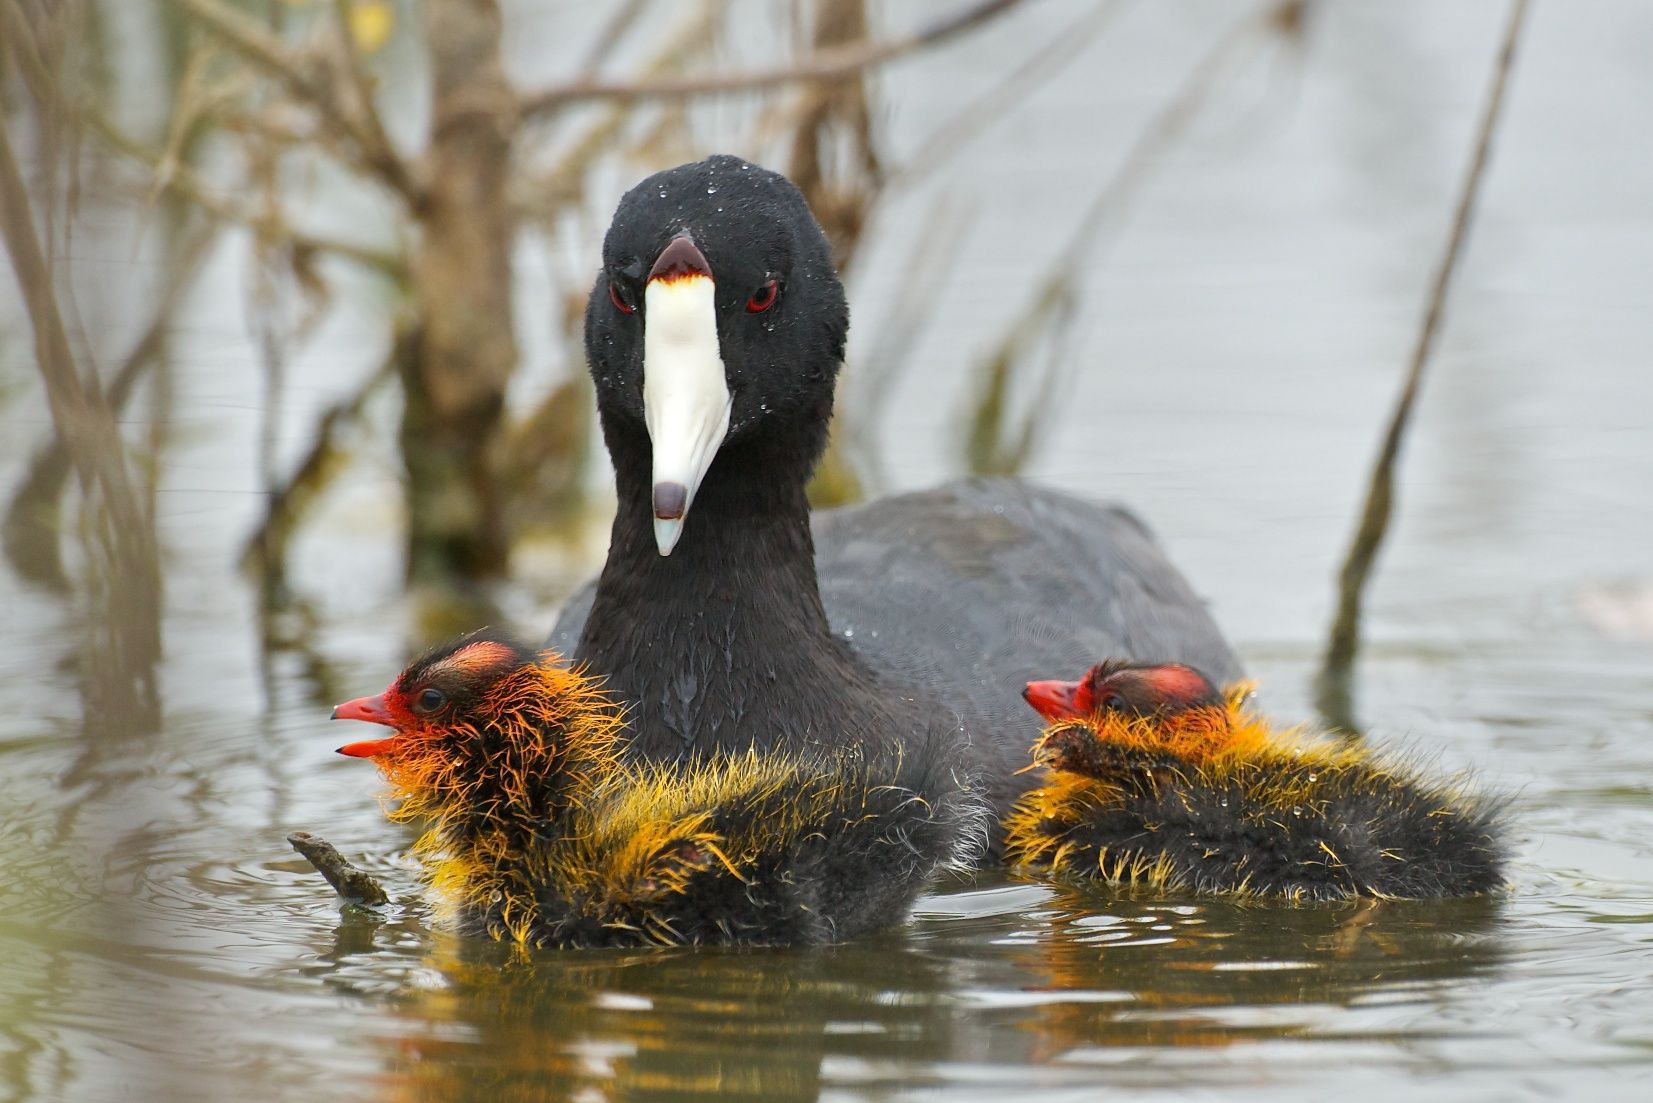 The head of a coot